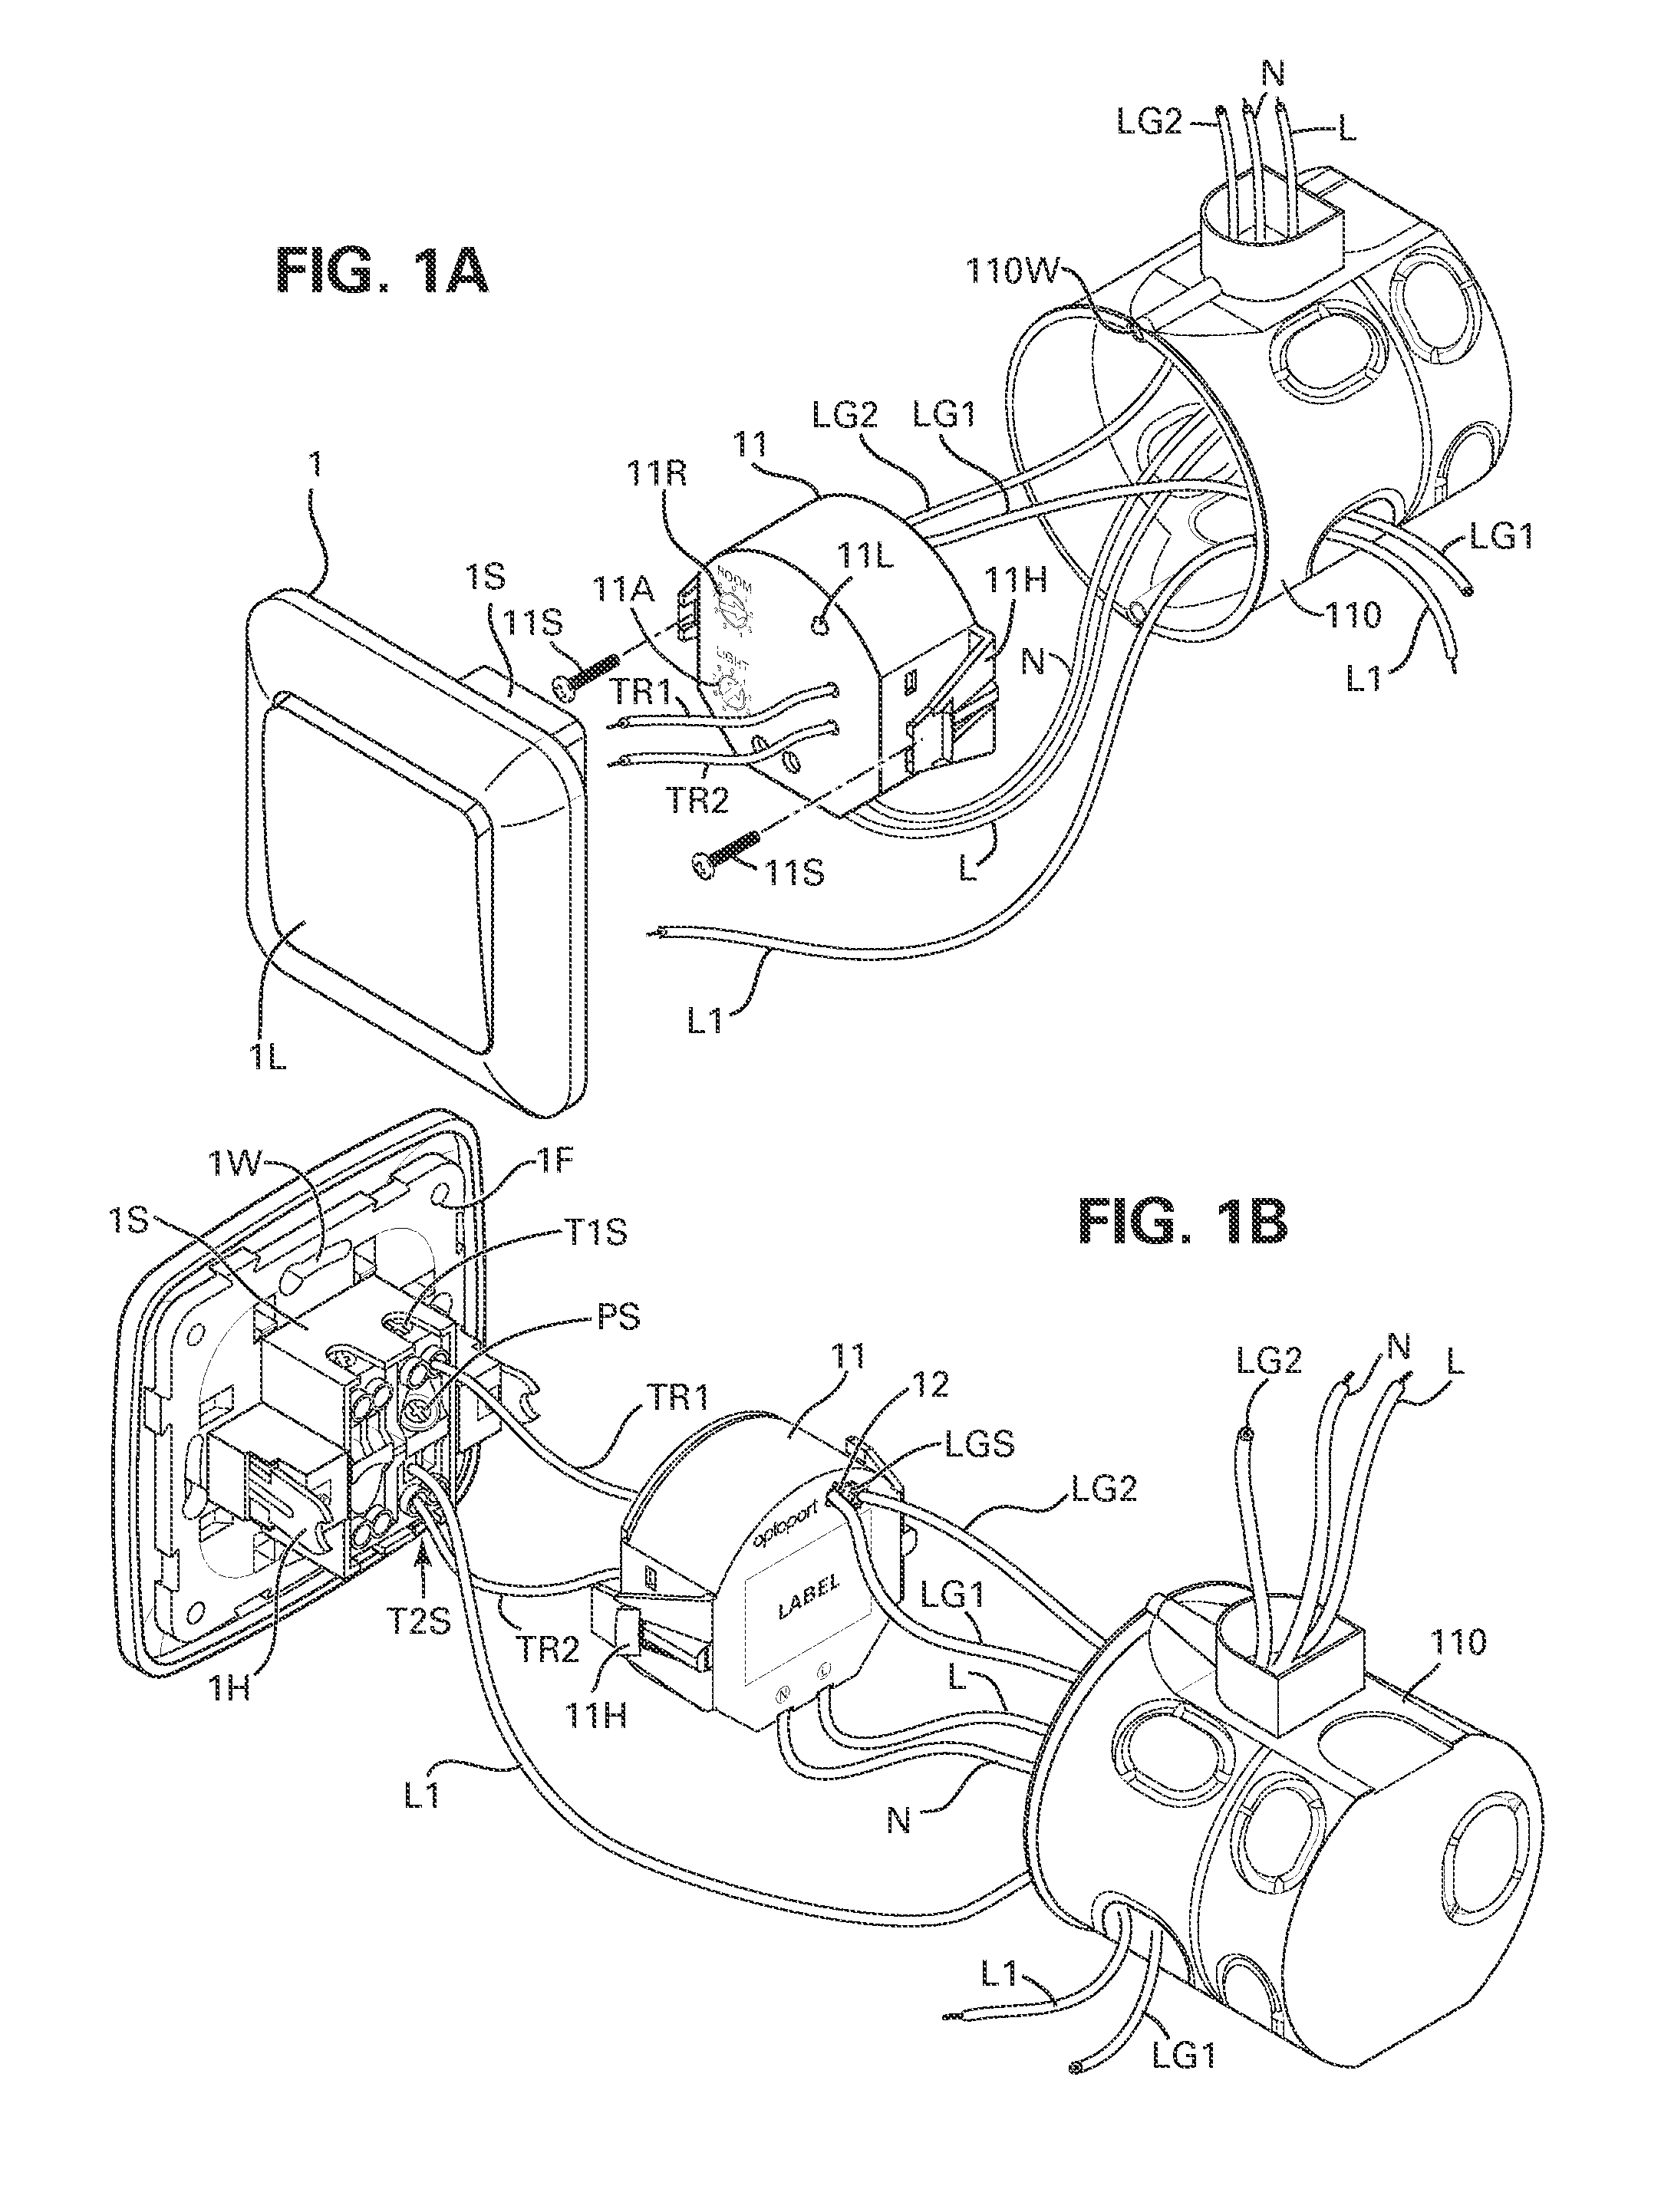 Method and Apparatus for Combining AC Power Relay and Current Sensors with AC Wiring Devices